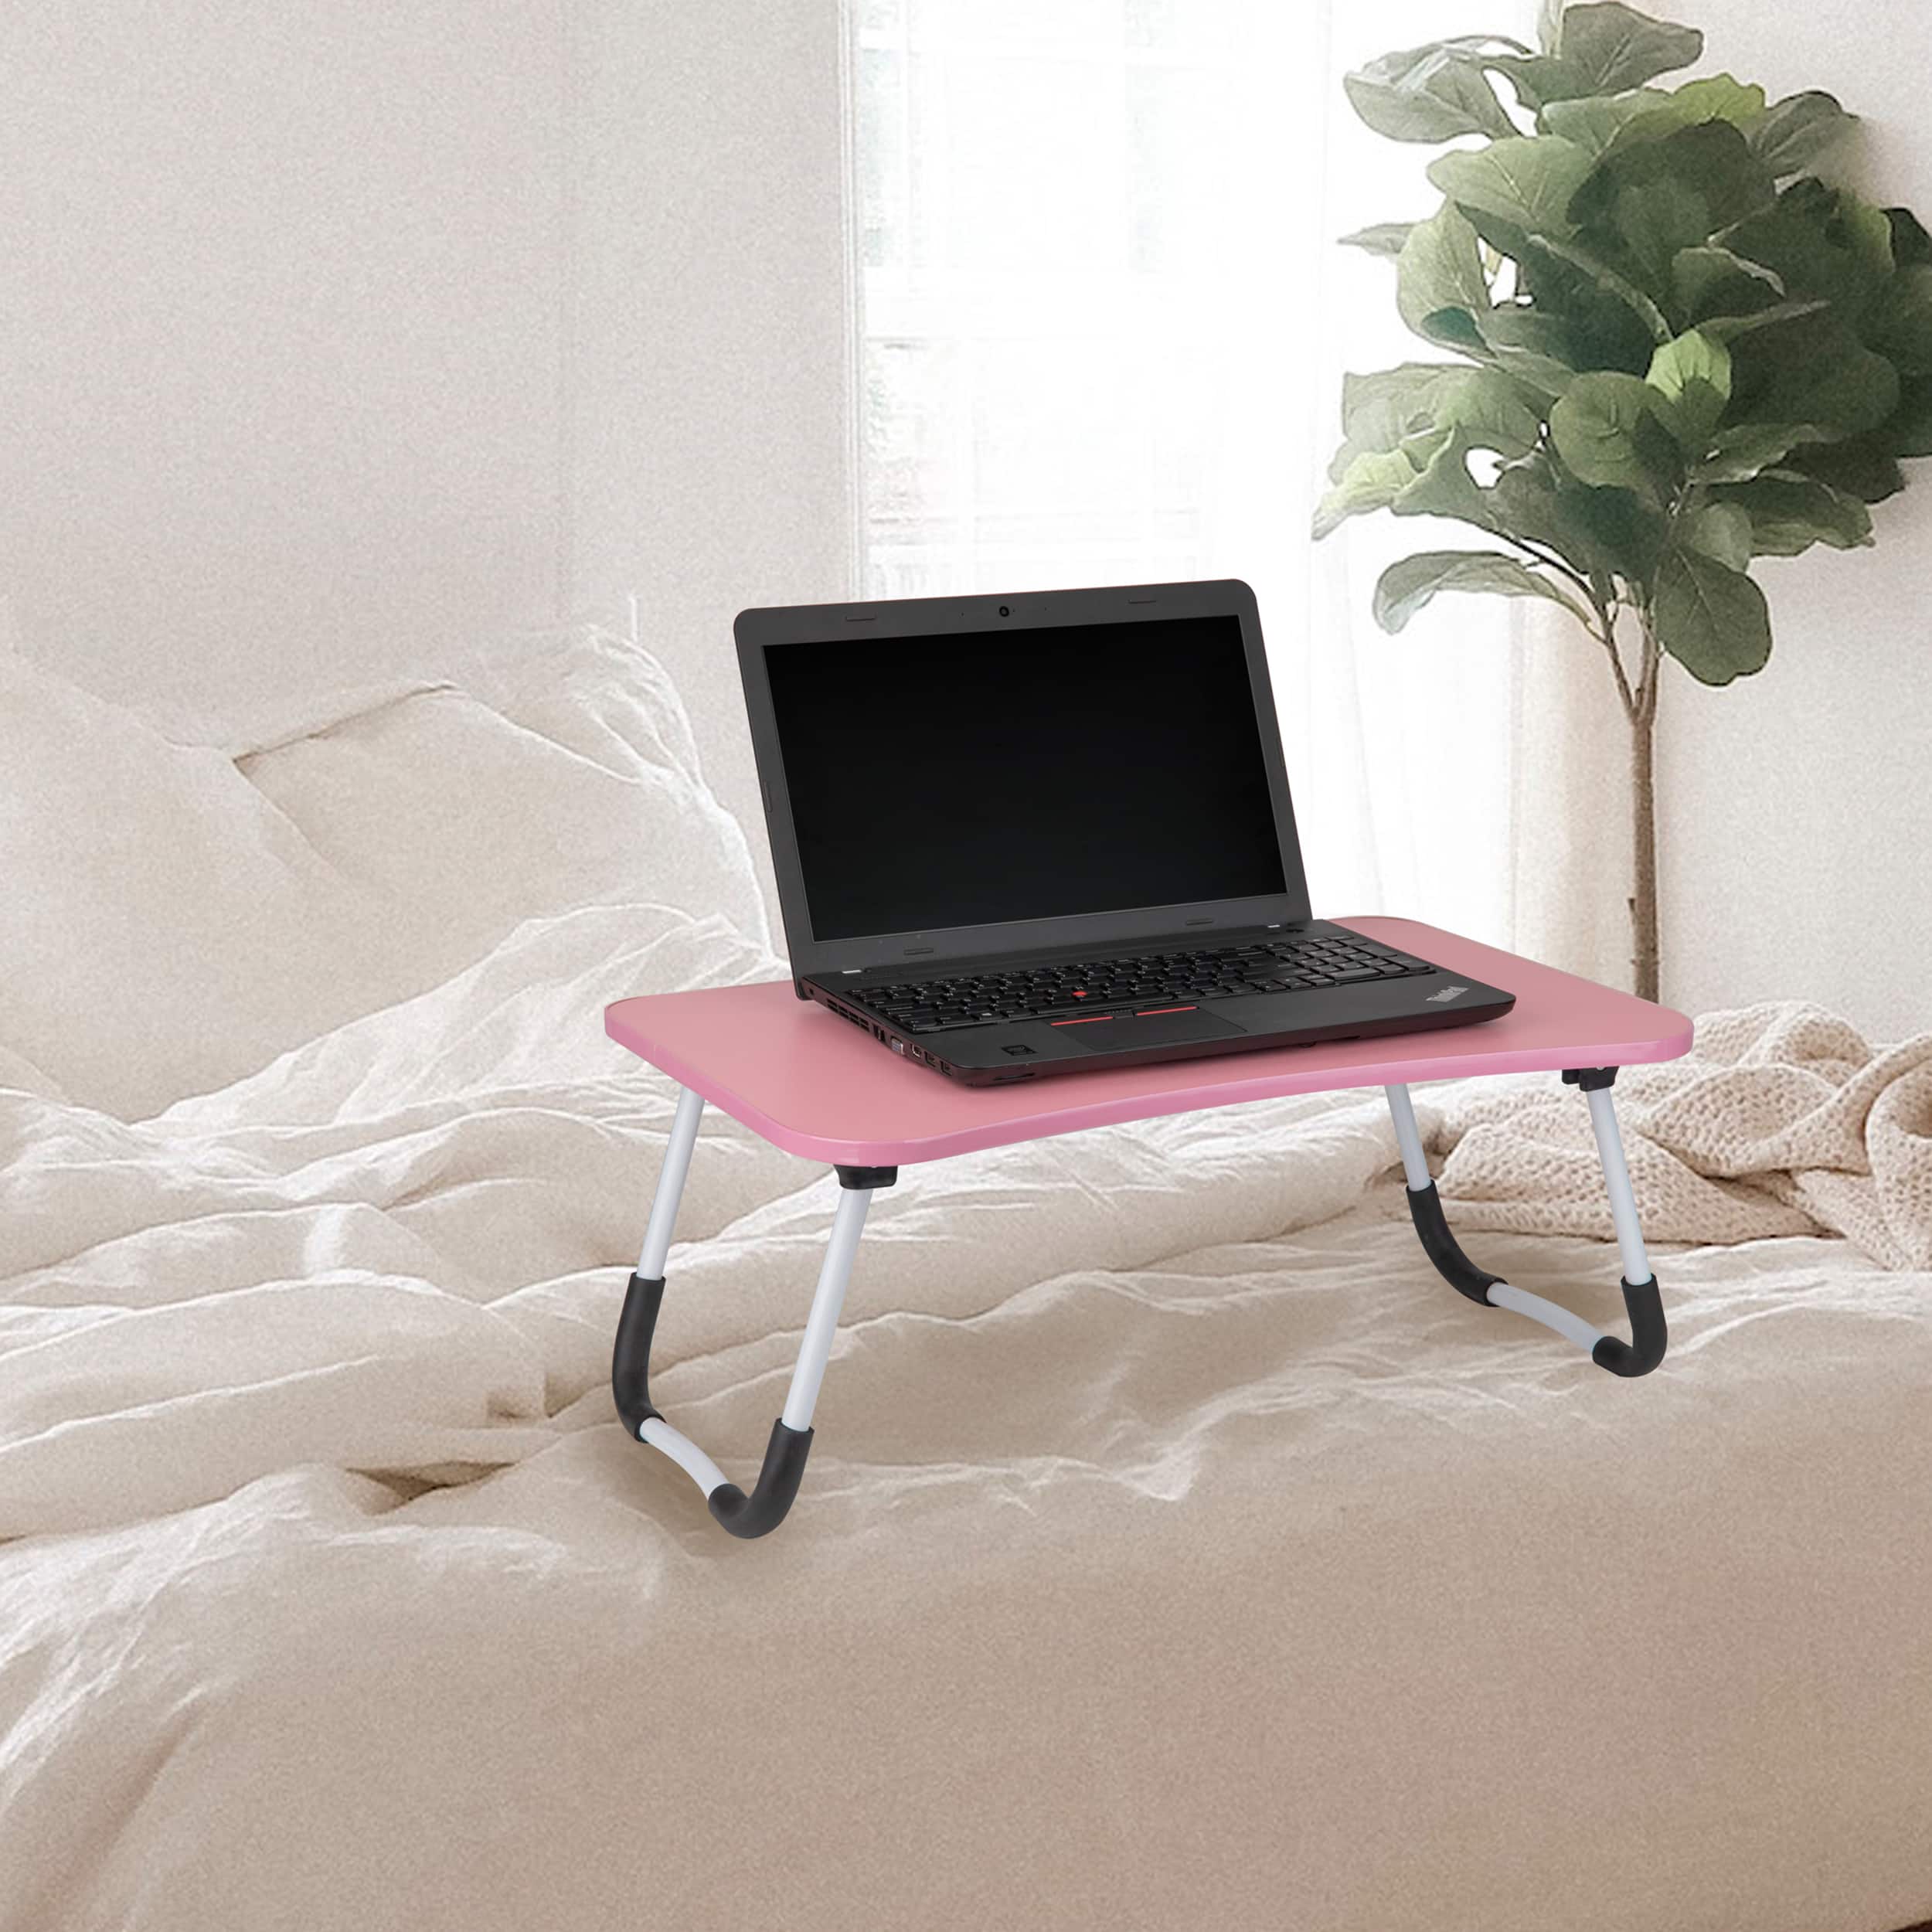 Mind Reader Freestanding Portable Foldable Lap Desk with Fold-Up Legs